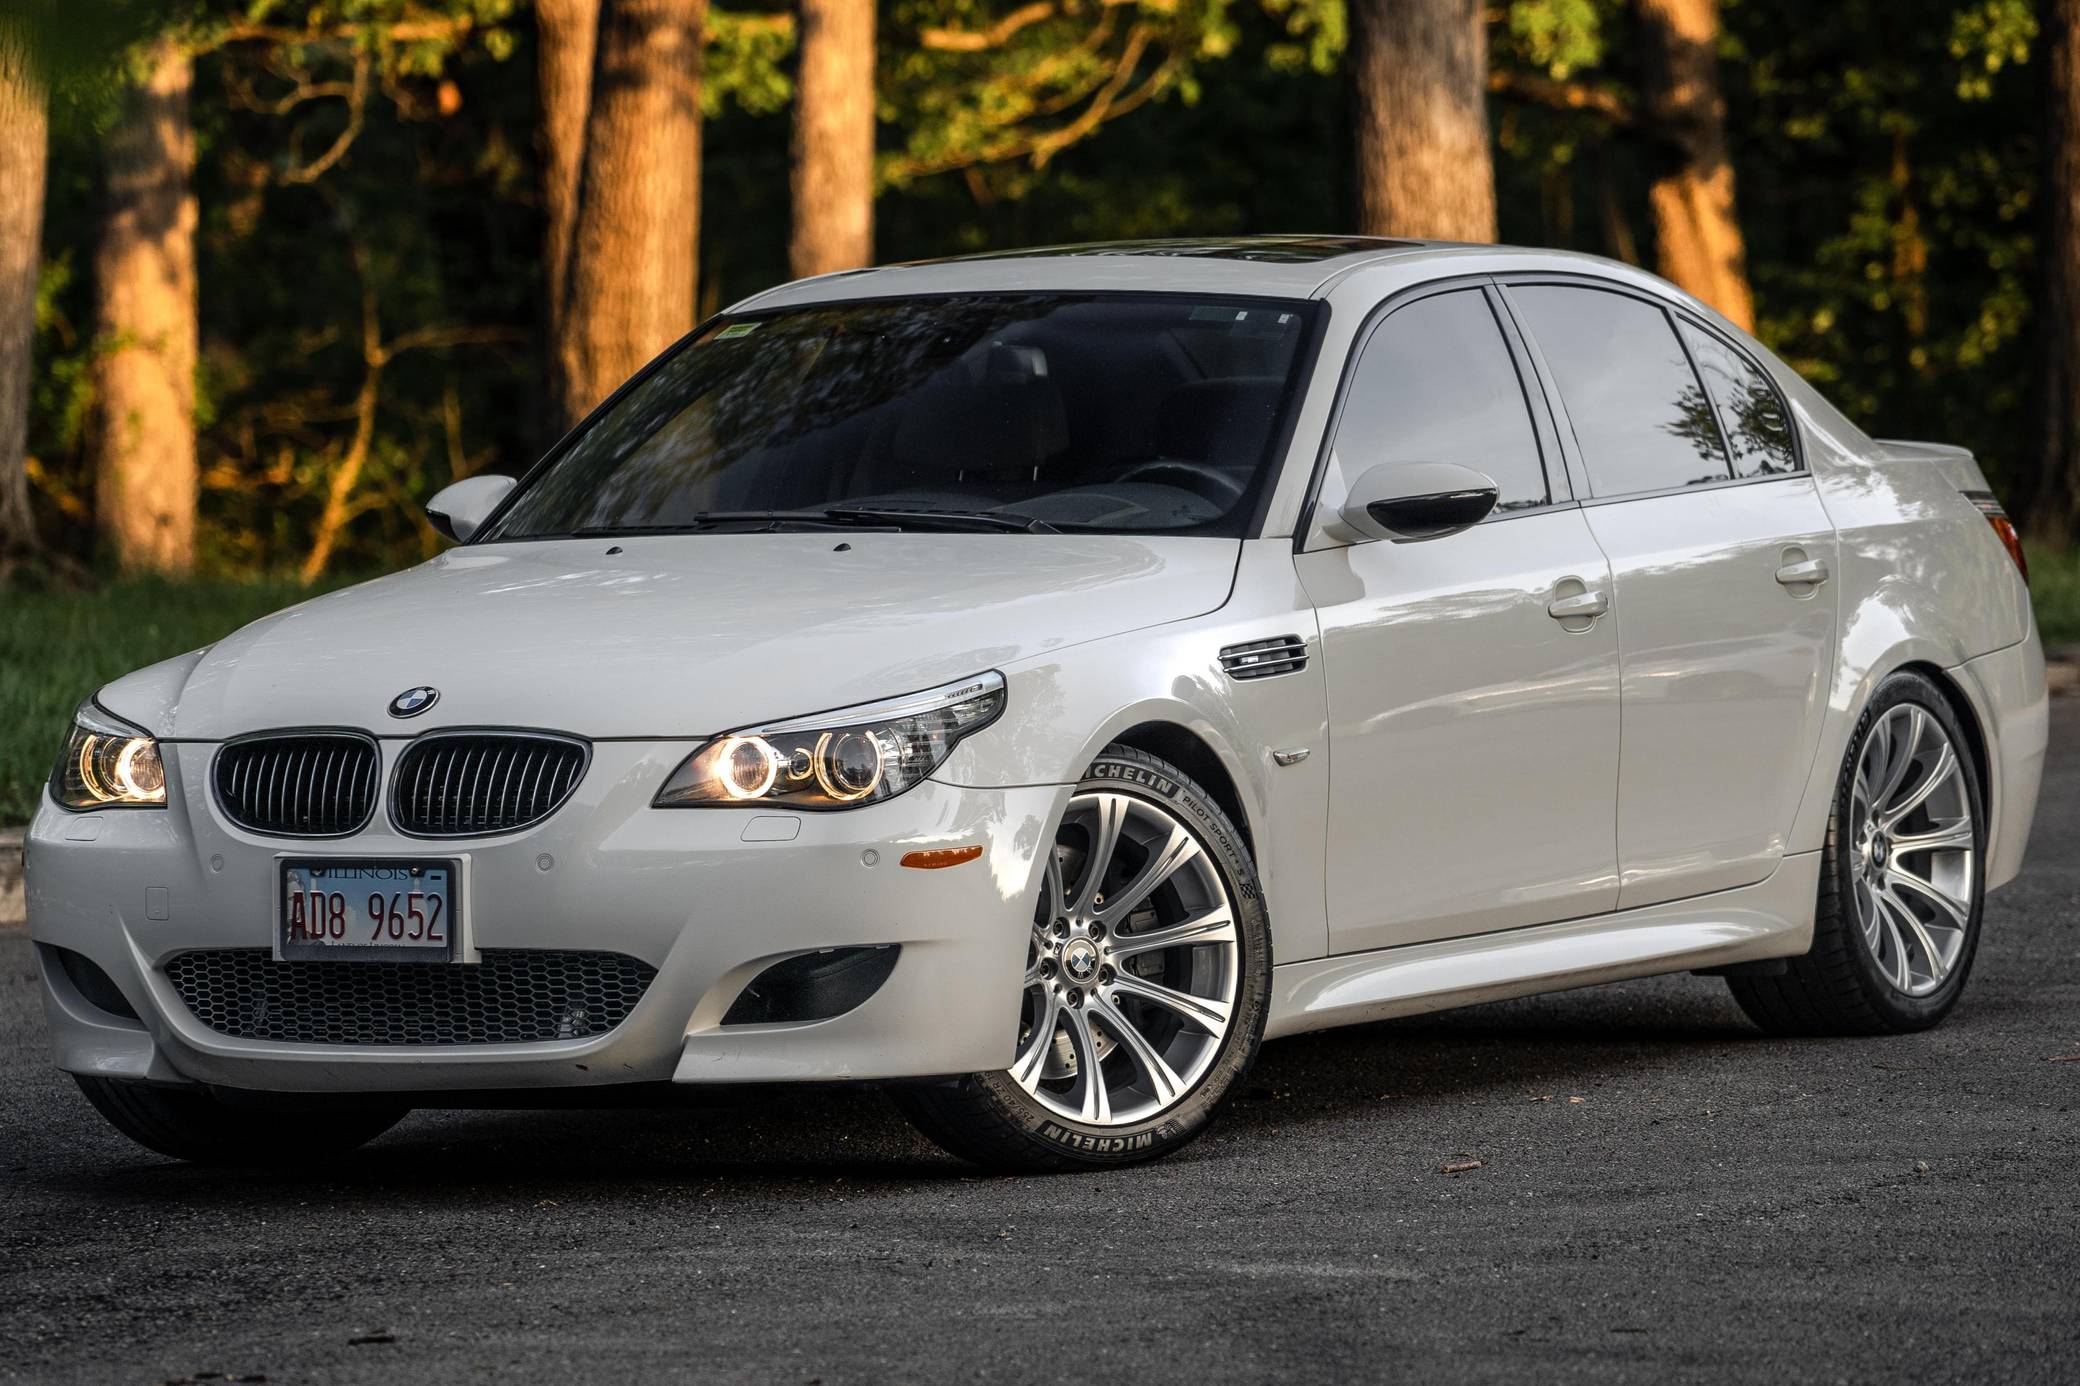 2008 BMW 5er ( E60 ) M Sports Package by 3D Design - Free high resolution  car images